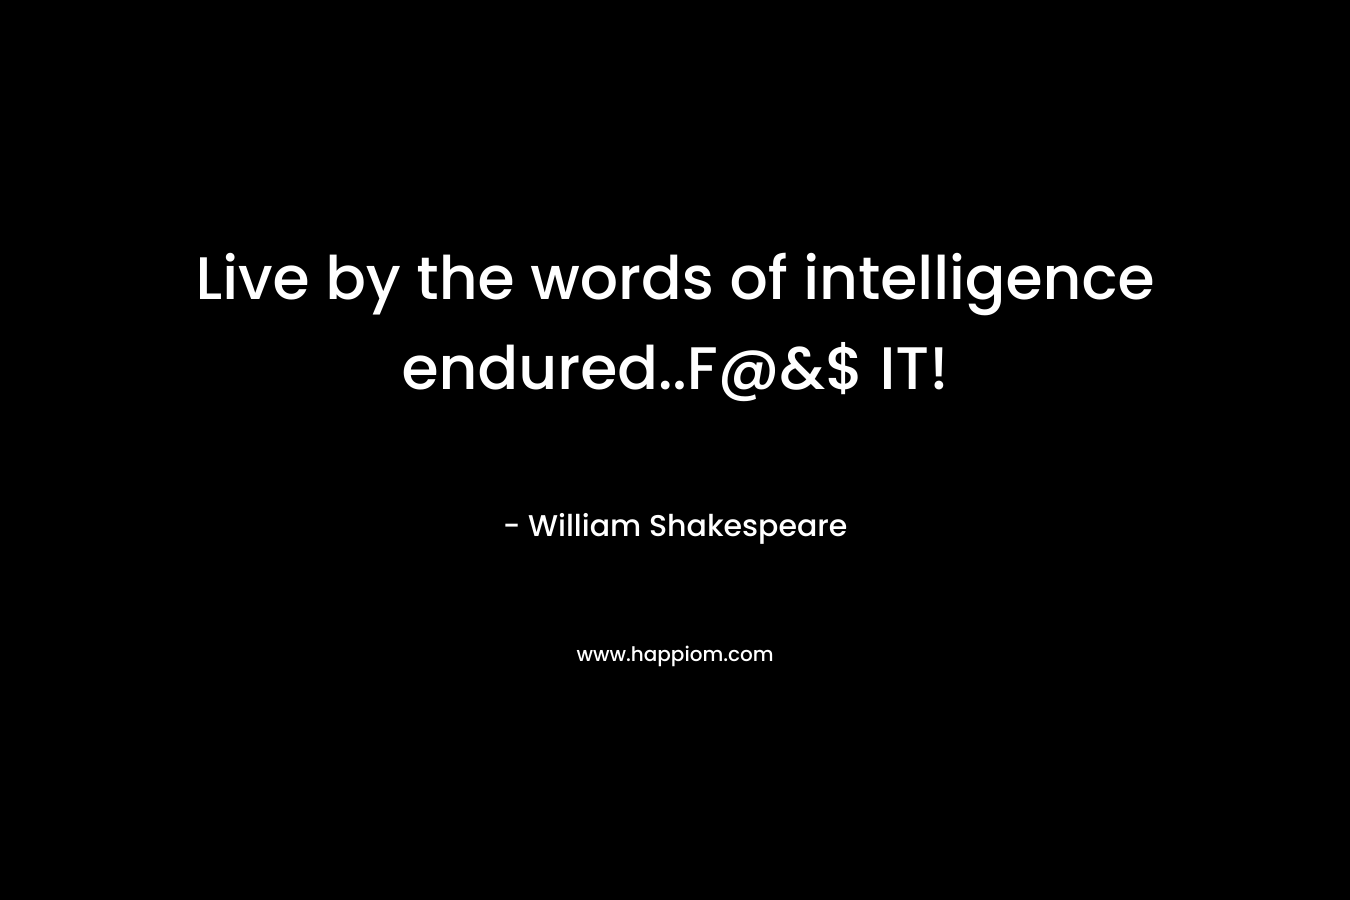 Live by the words of intelligence endured..F@&$ IT!